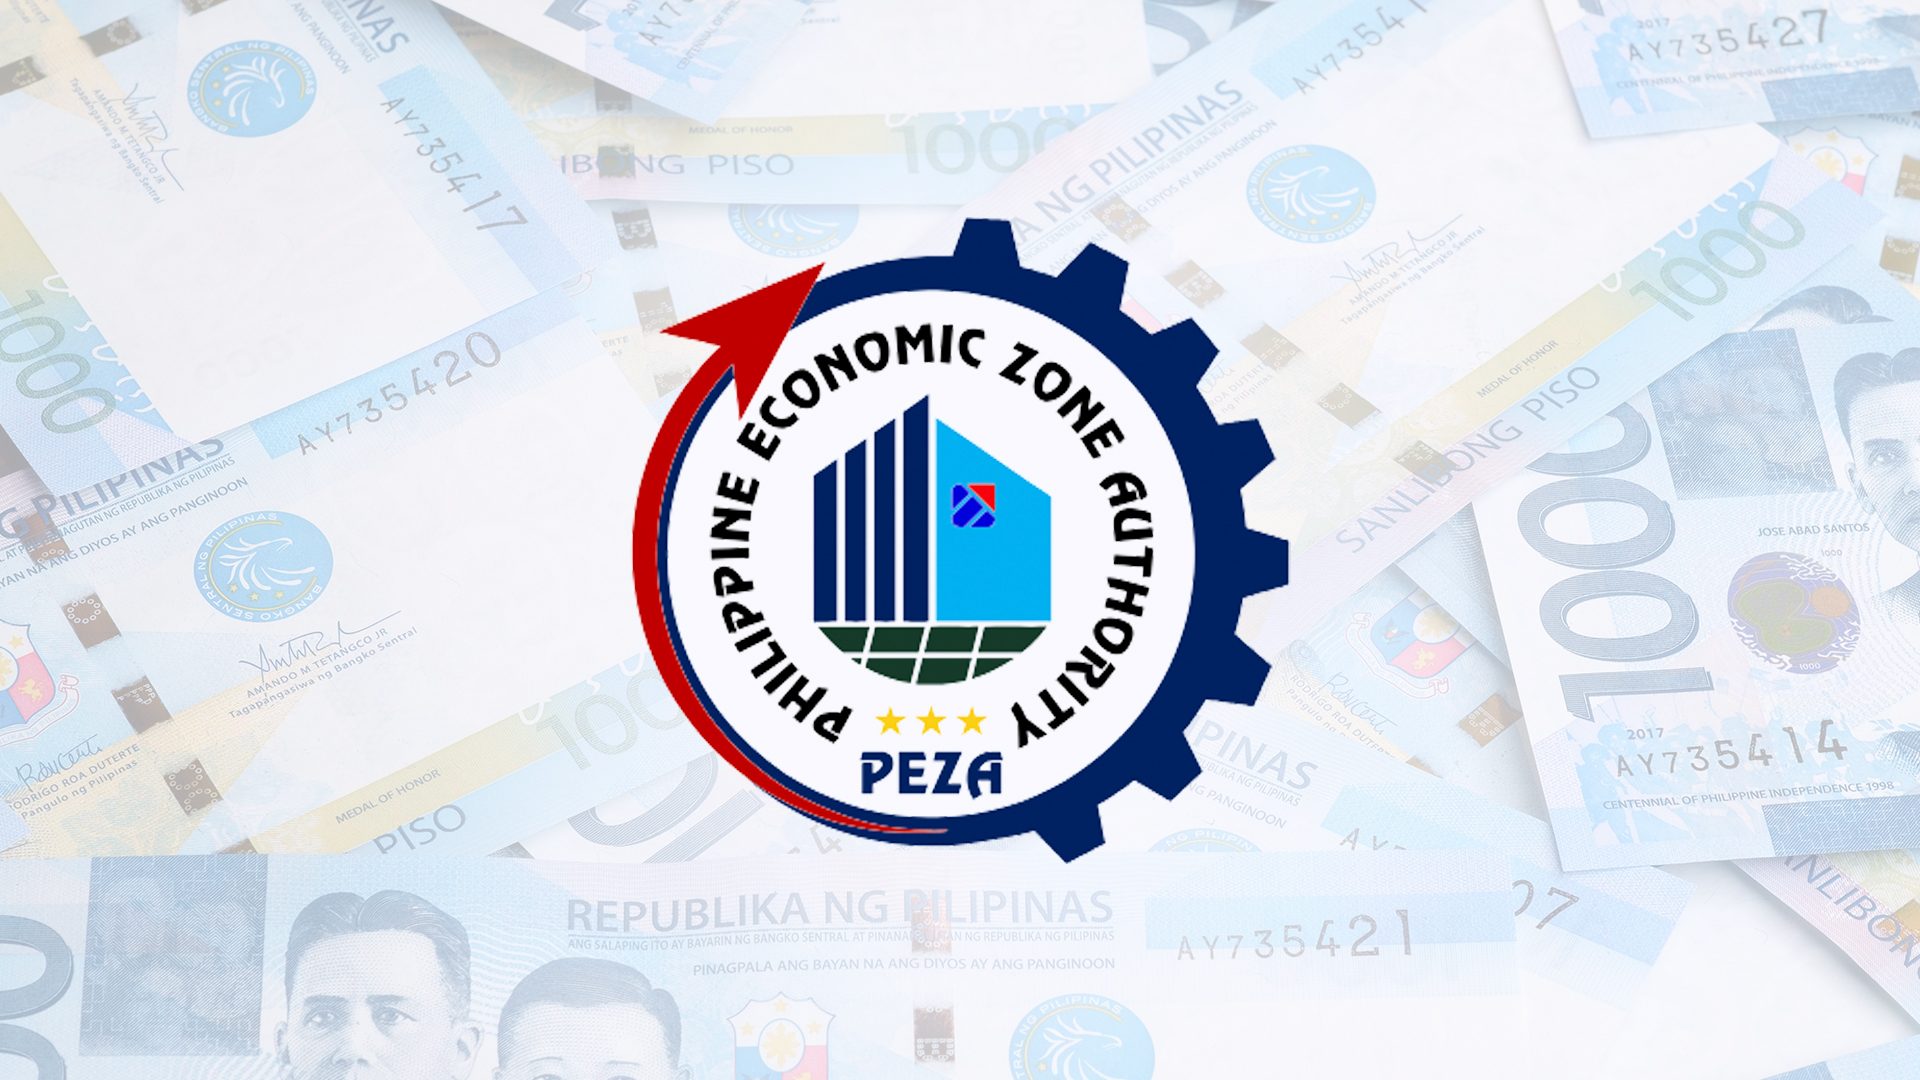 COA upholds disallowance of P664 million in cash perks for PEZA personnel